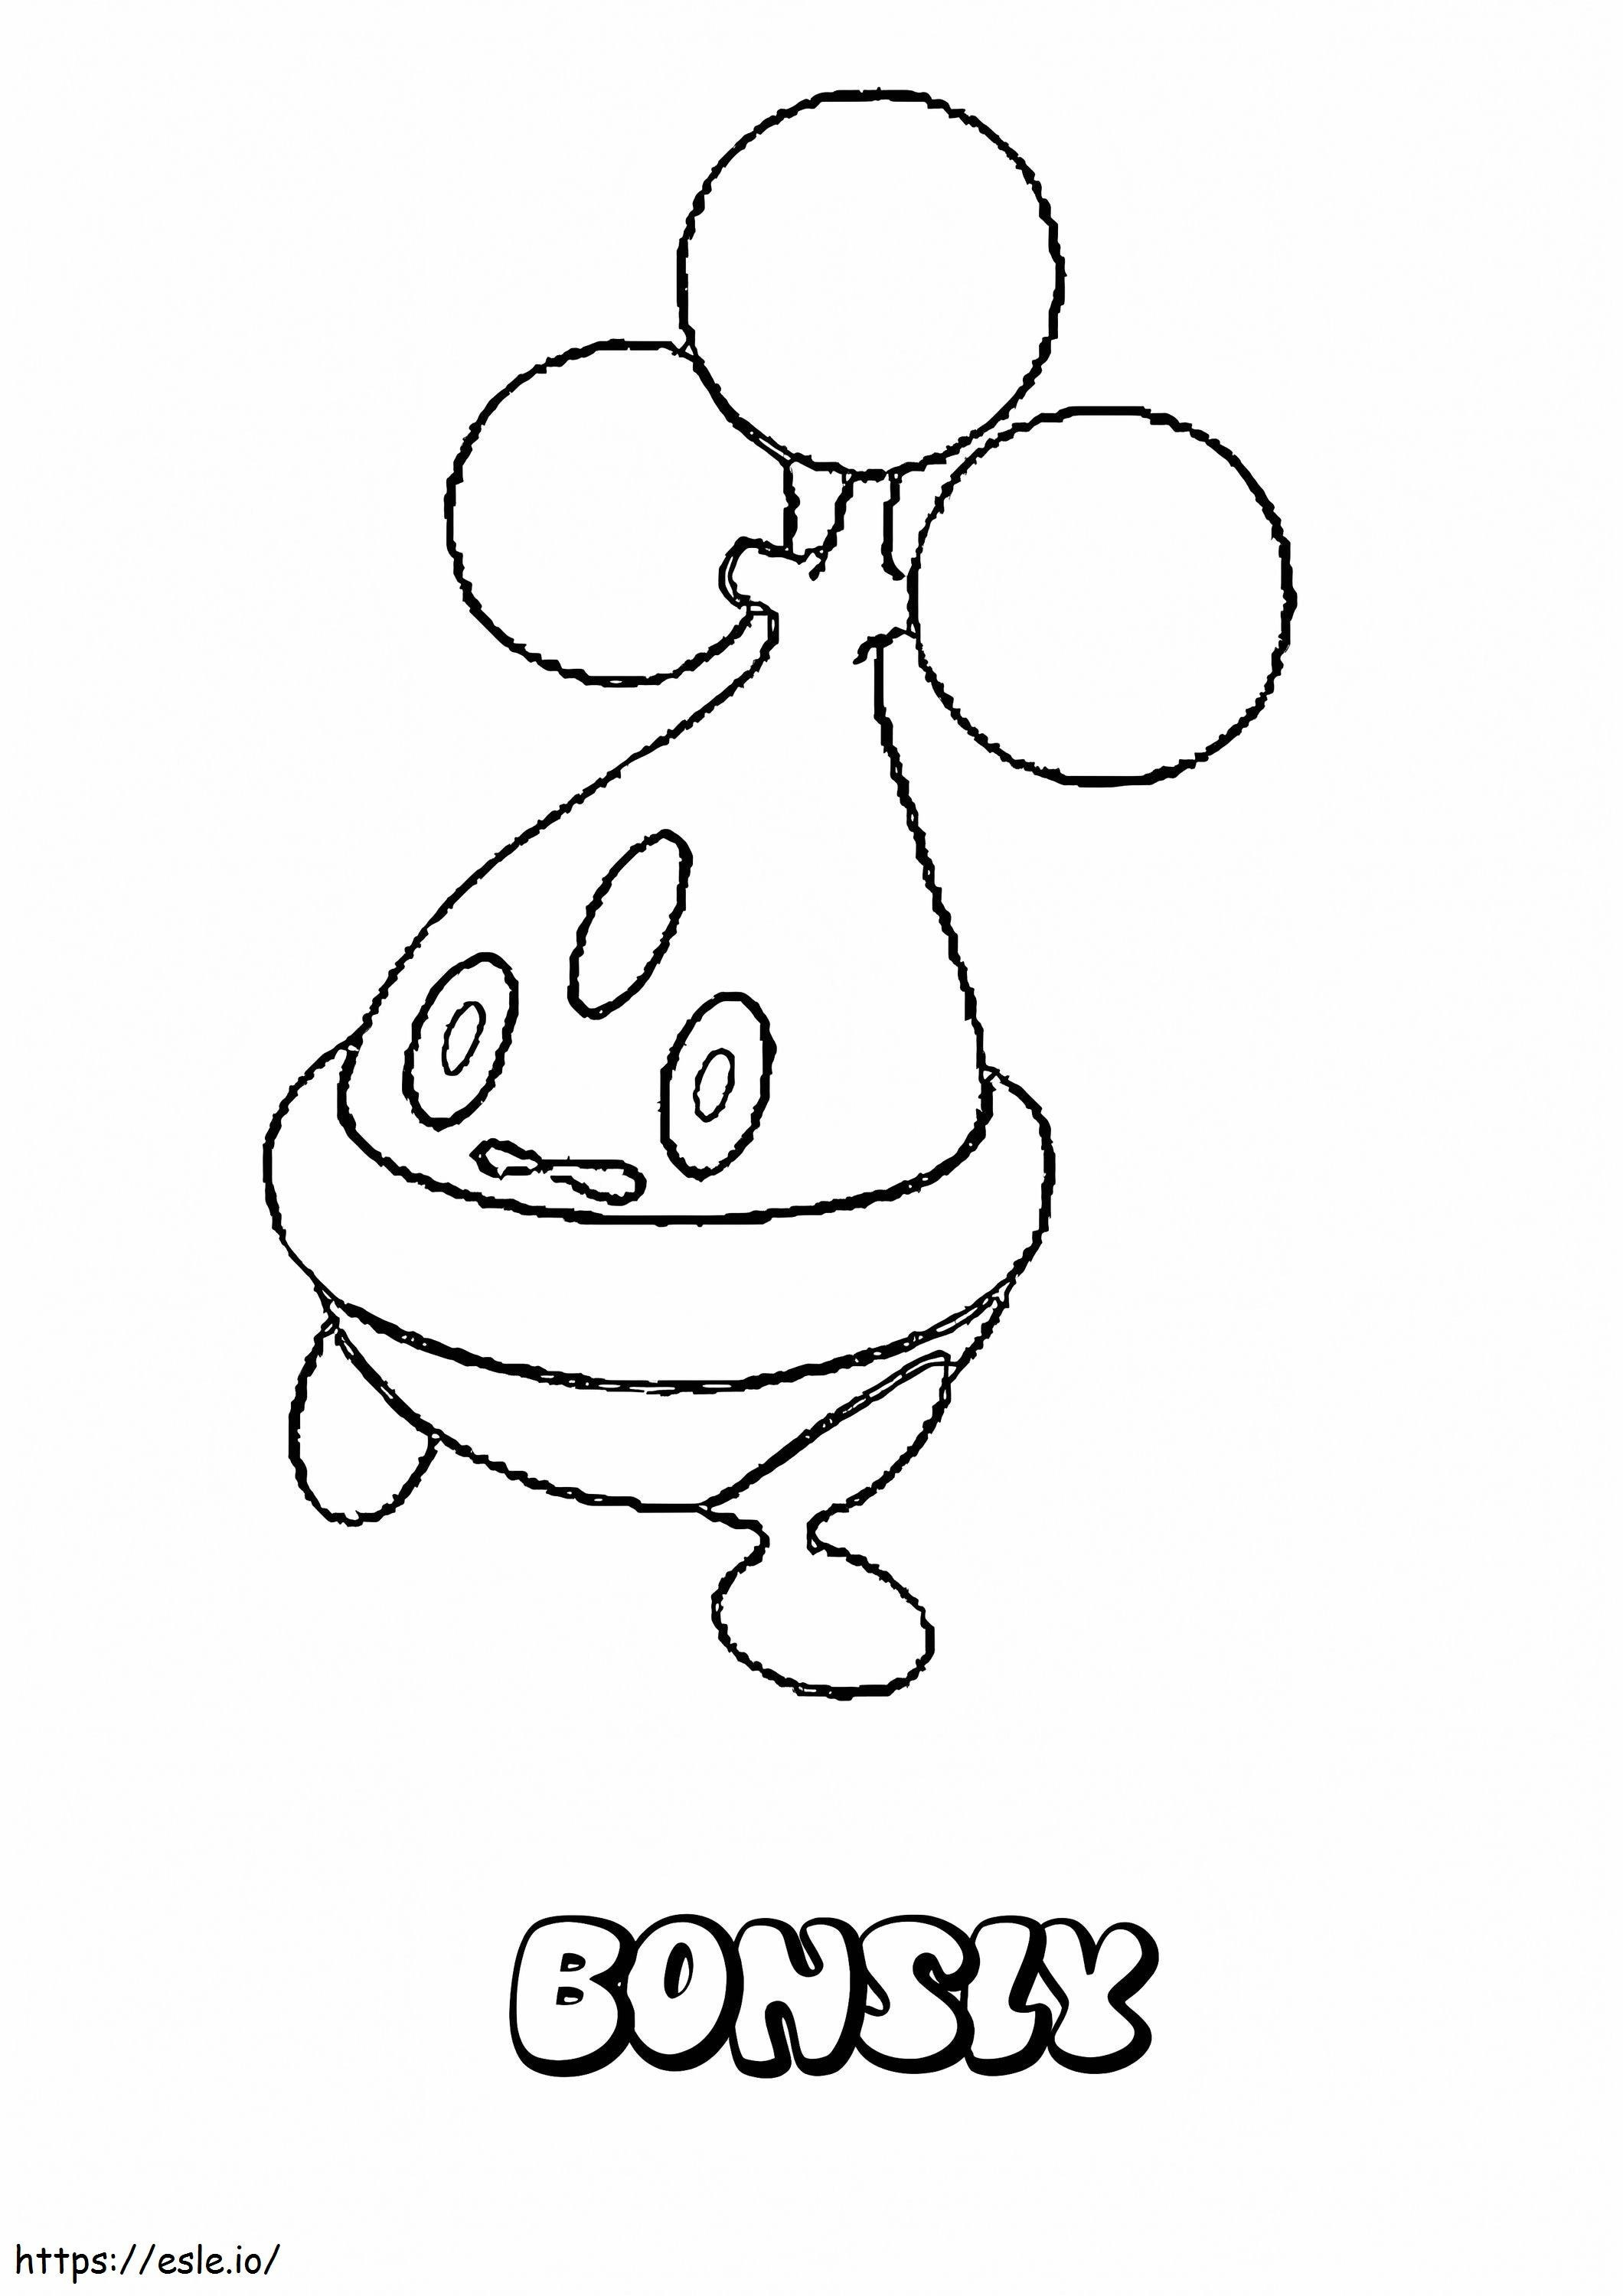 Bonsly Pokemon coloring page